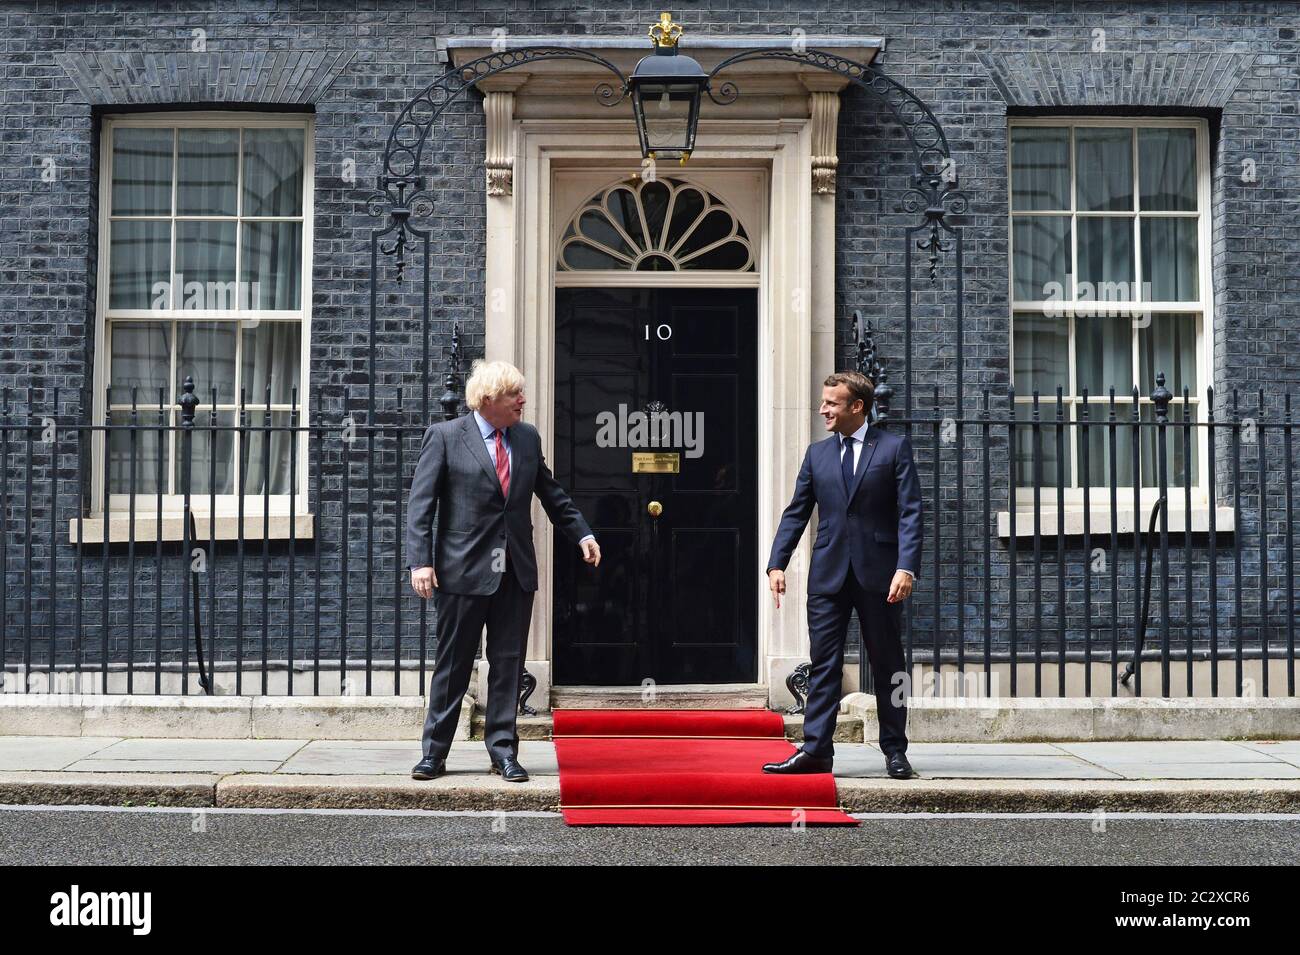 Prime Minister Boris Johnson welcomes French president Emmanuel Macron to Downing Street in London during his visit to the UK. Stock Photo